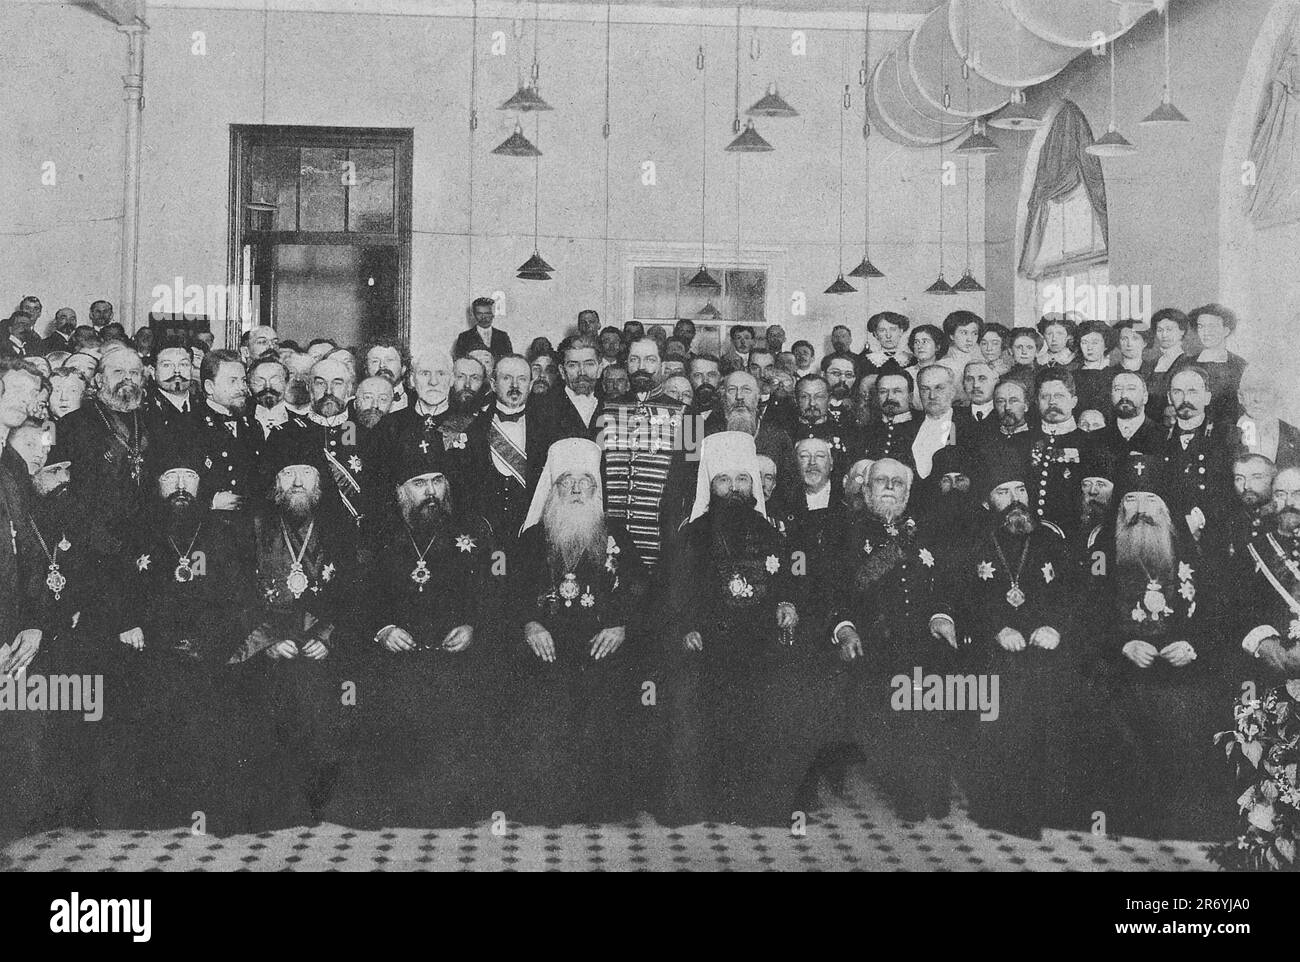 Honored guests who attended the celebration in honor of the 200th anniversary of the Synodal Printing House. Photo taken in 1911. Stock Photo